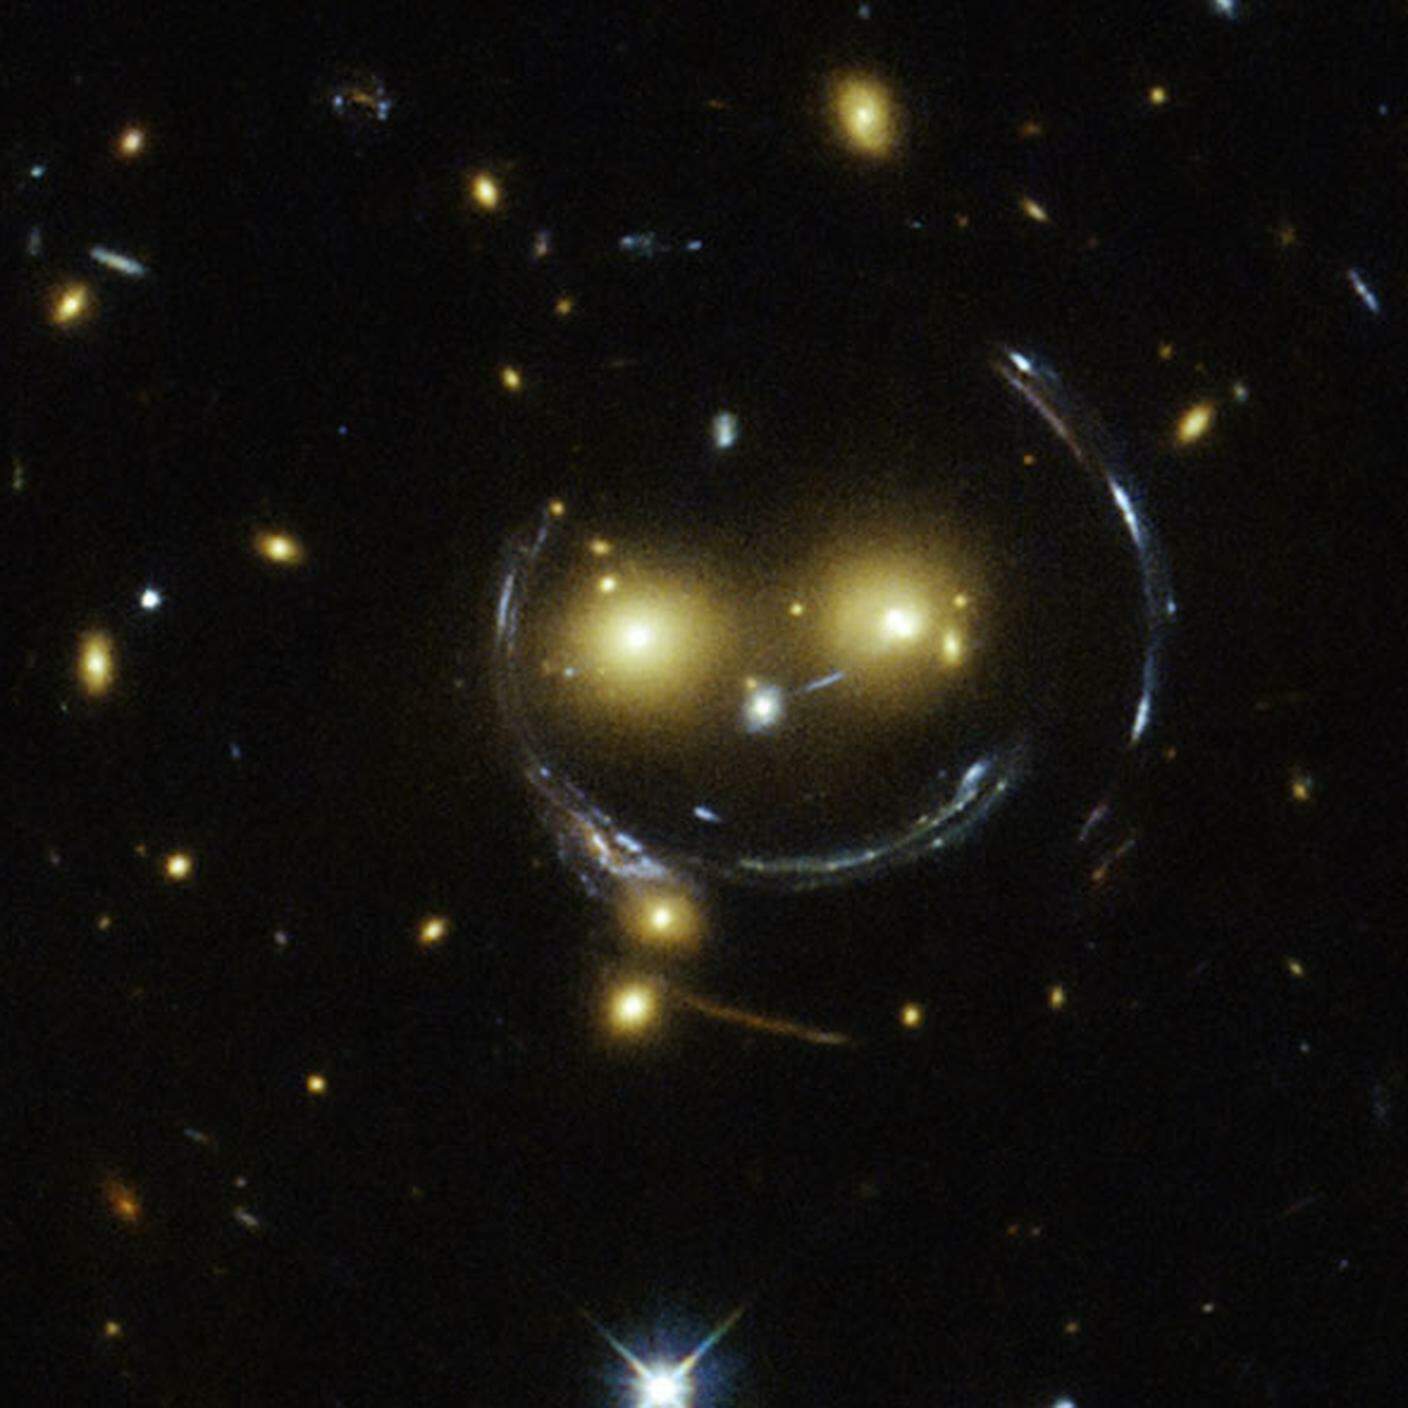 A galactic smile